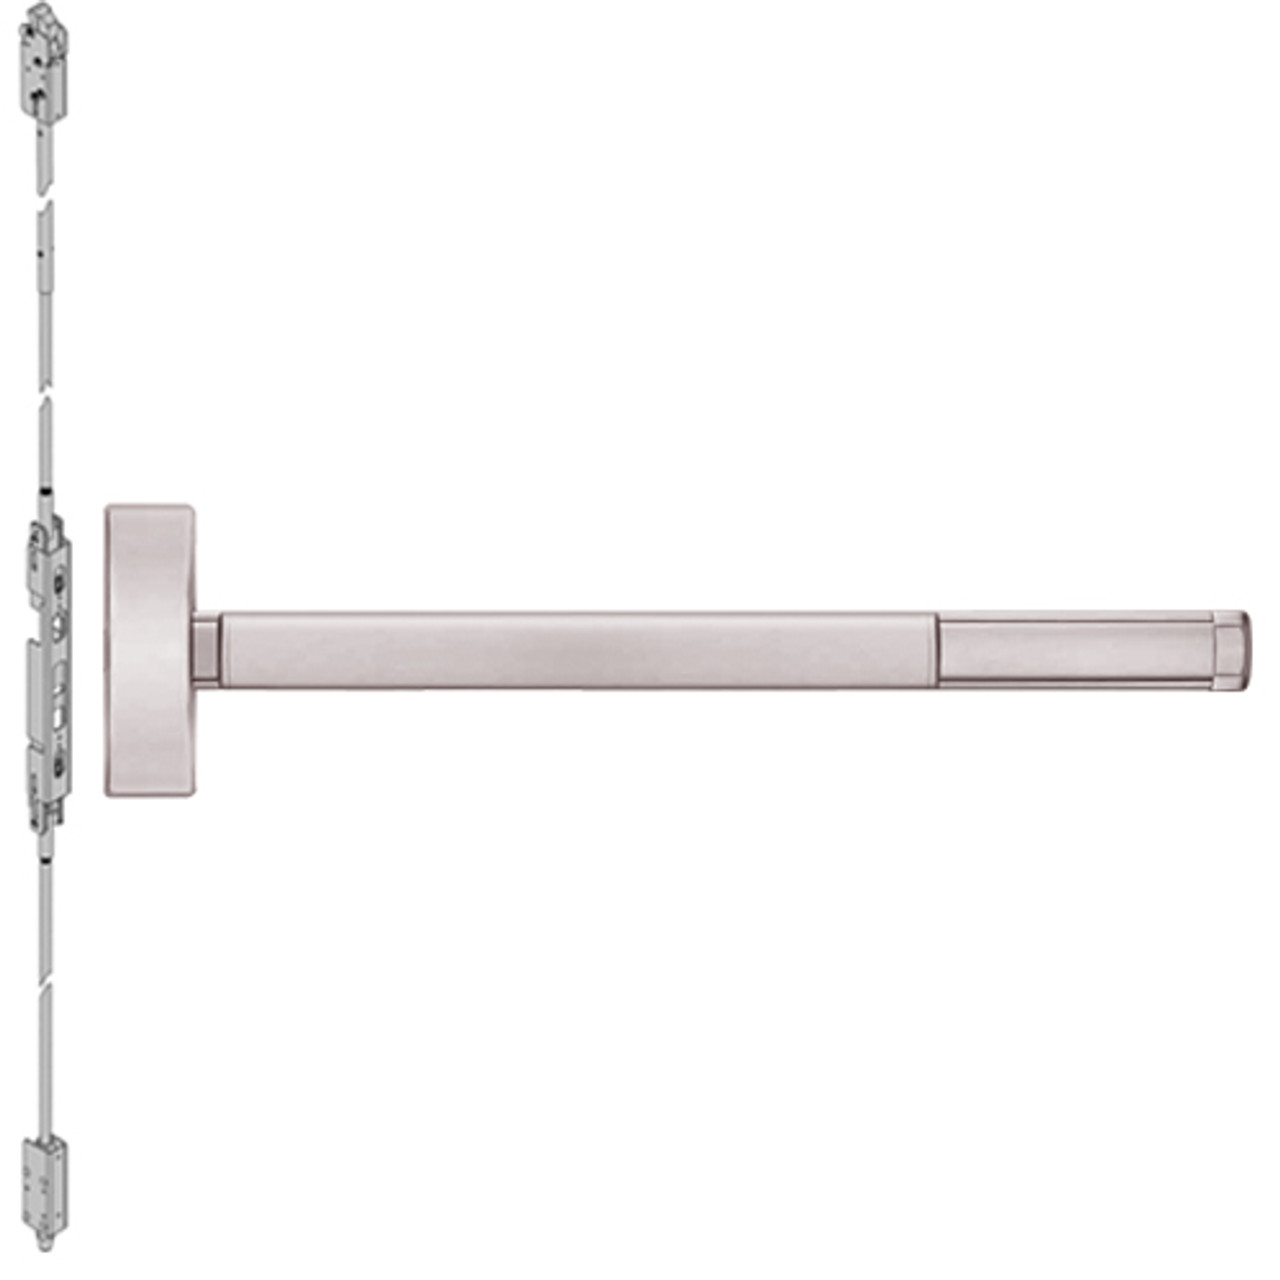 2805LBRCD-628-36 PHI 2800 Series Non Fire Rated Concealed Vertical Rod Exit Device Prepped for Key Controls Thumb Piece in Satin Aluminum Finish